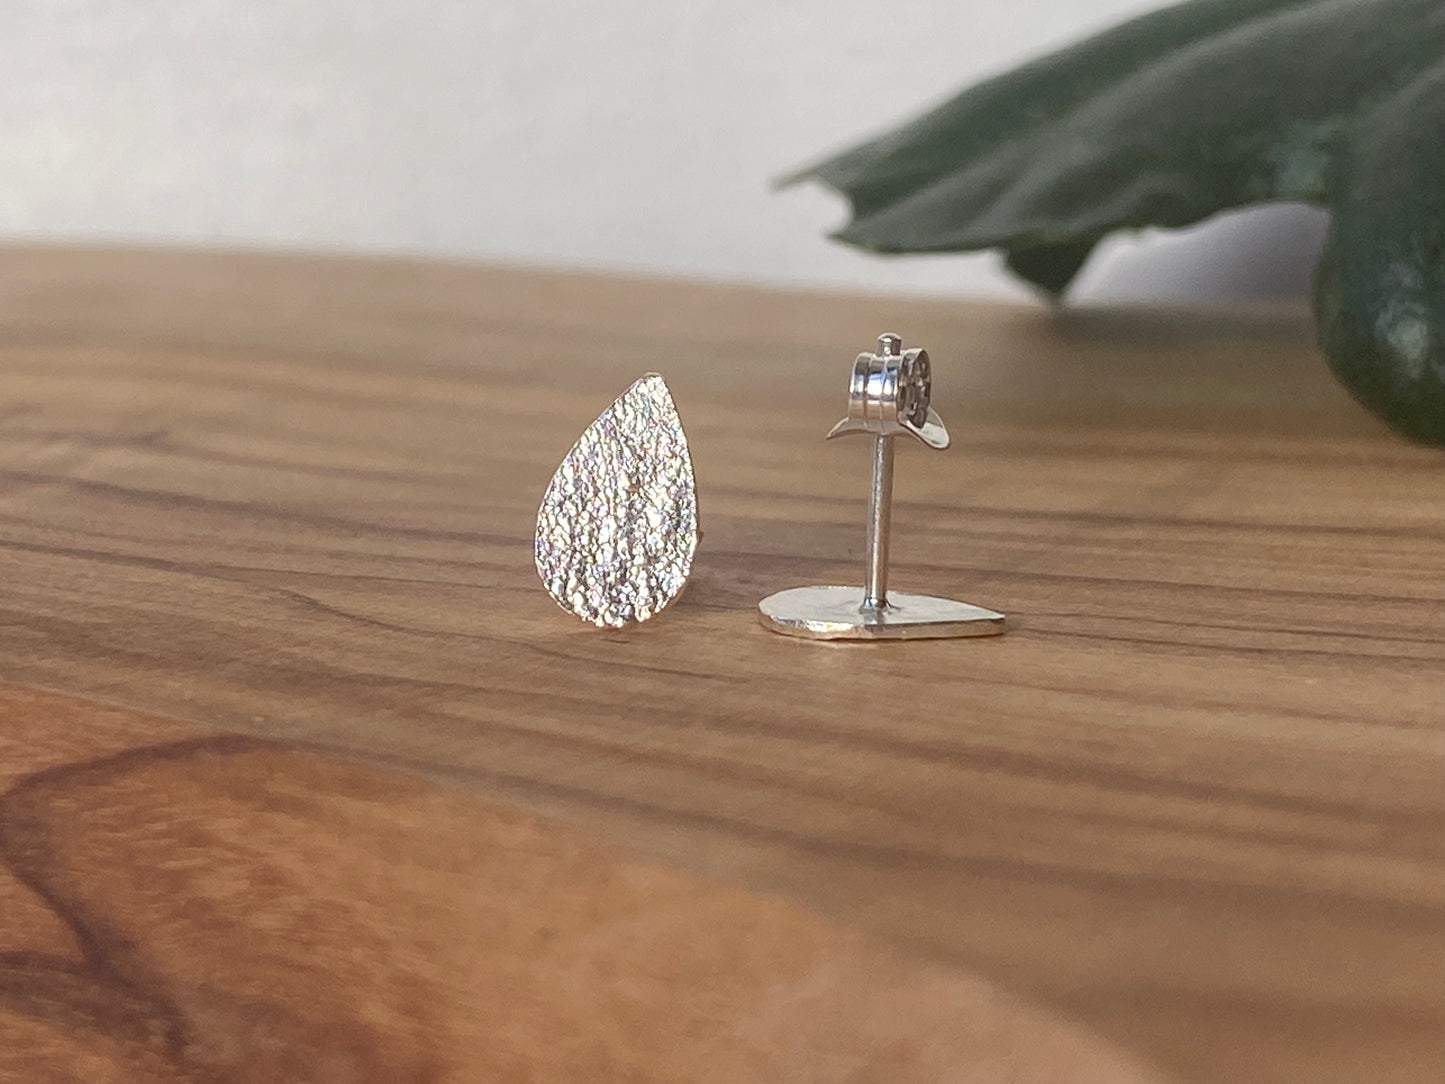 Reticulated silver drop studs